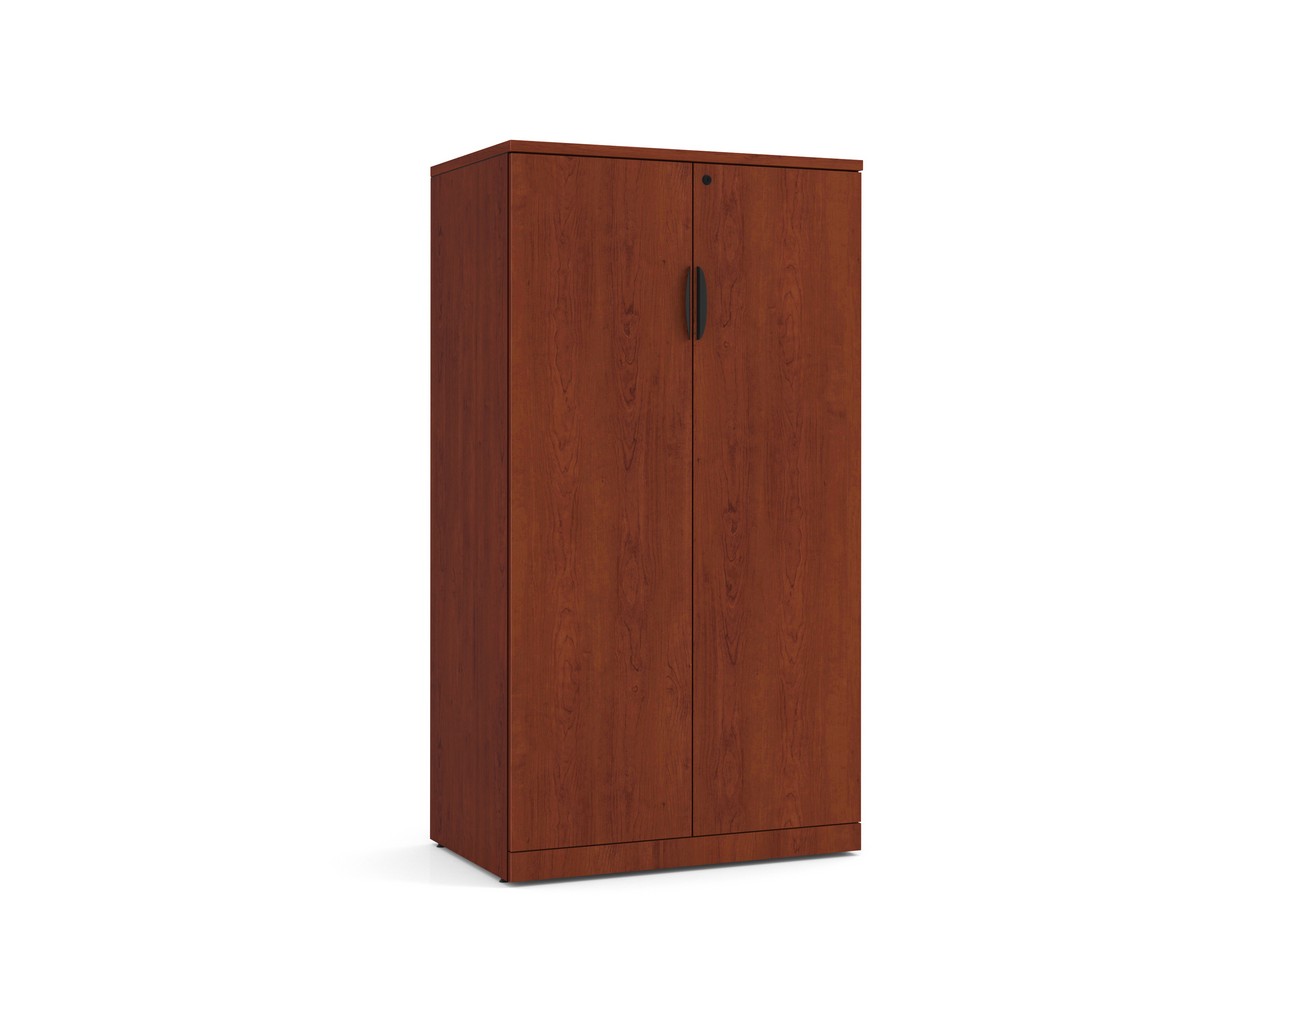 Locking Double Door Storage Cabinet 65 Inch with Cherry Finish